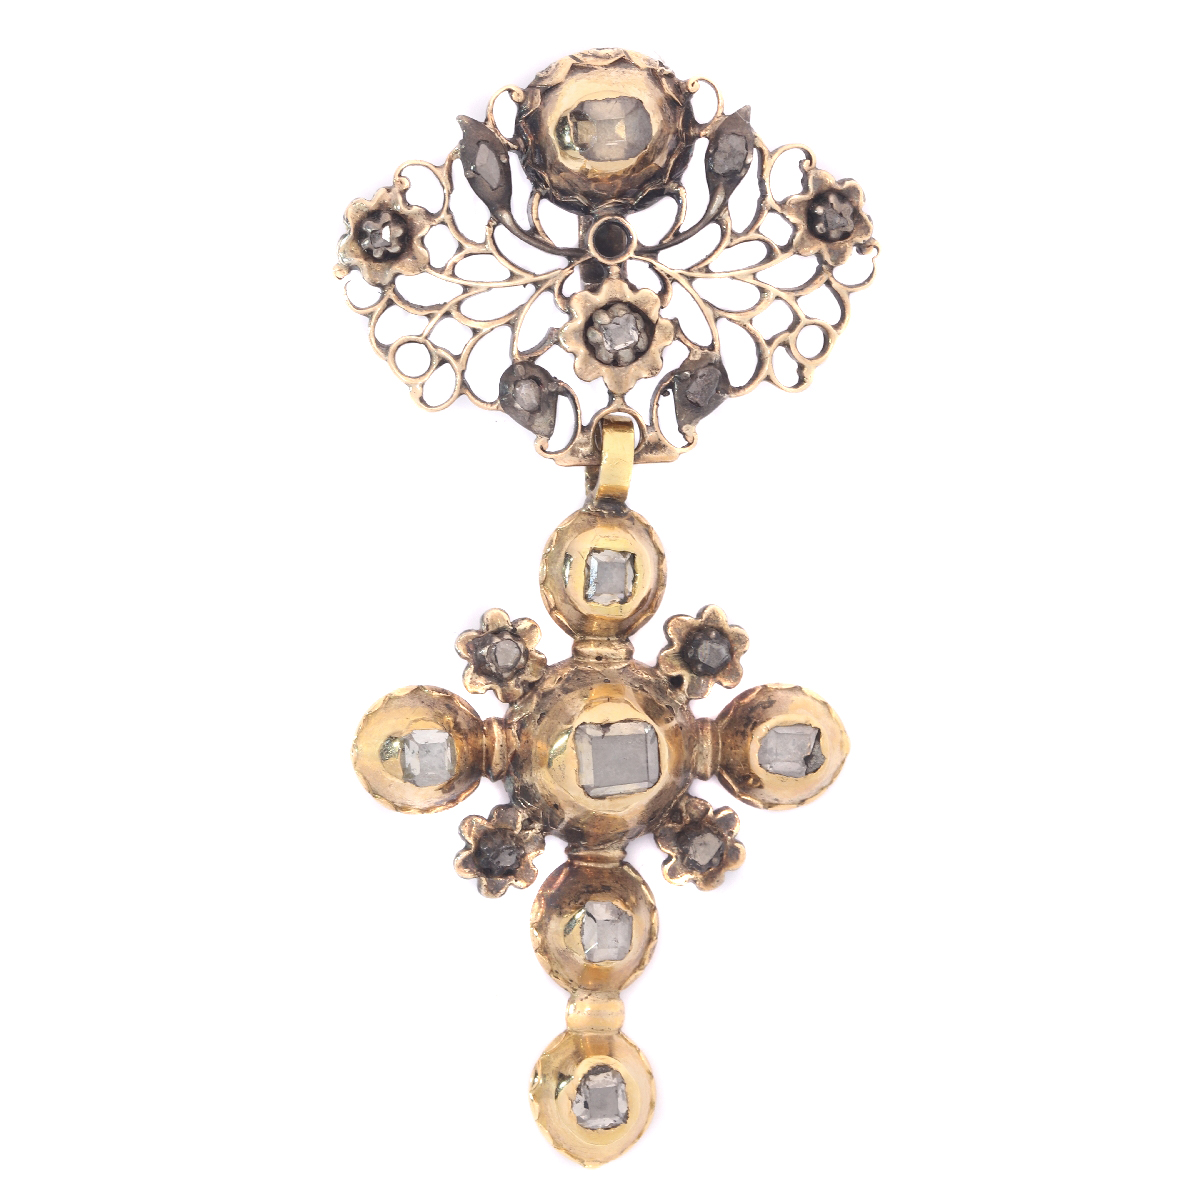 Old World Splendour: A Red Gold Diamond Cross from the 18th Century